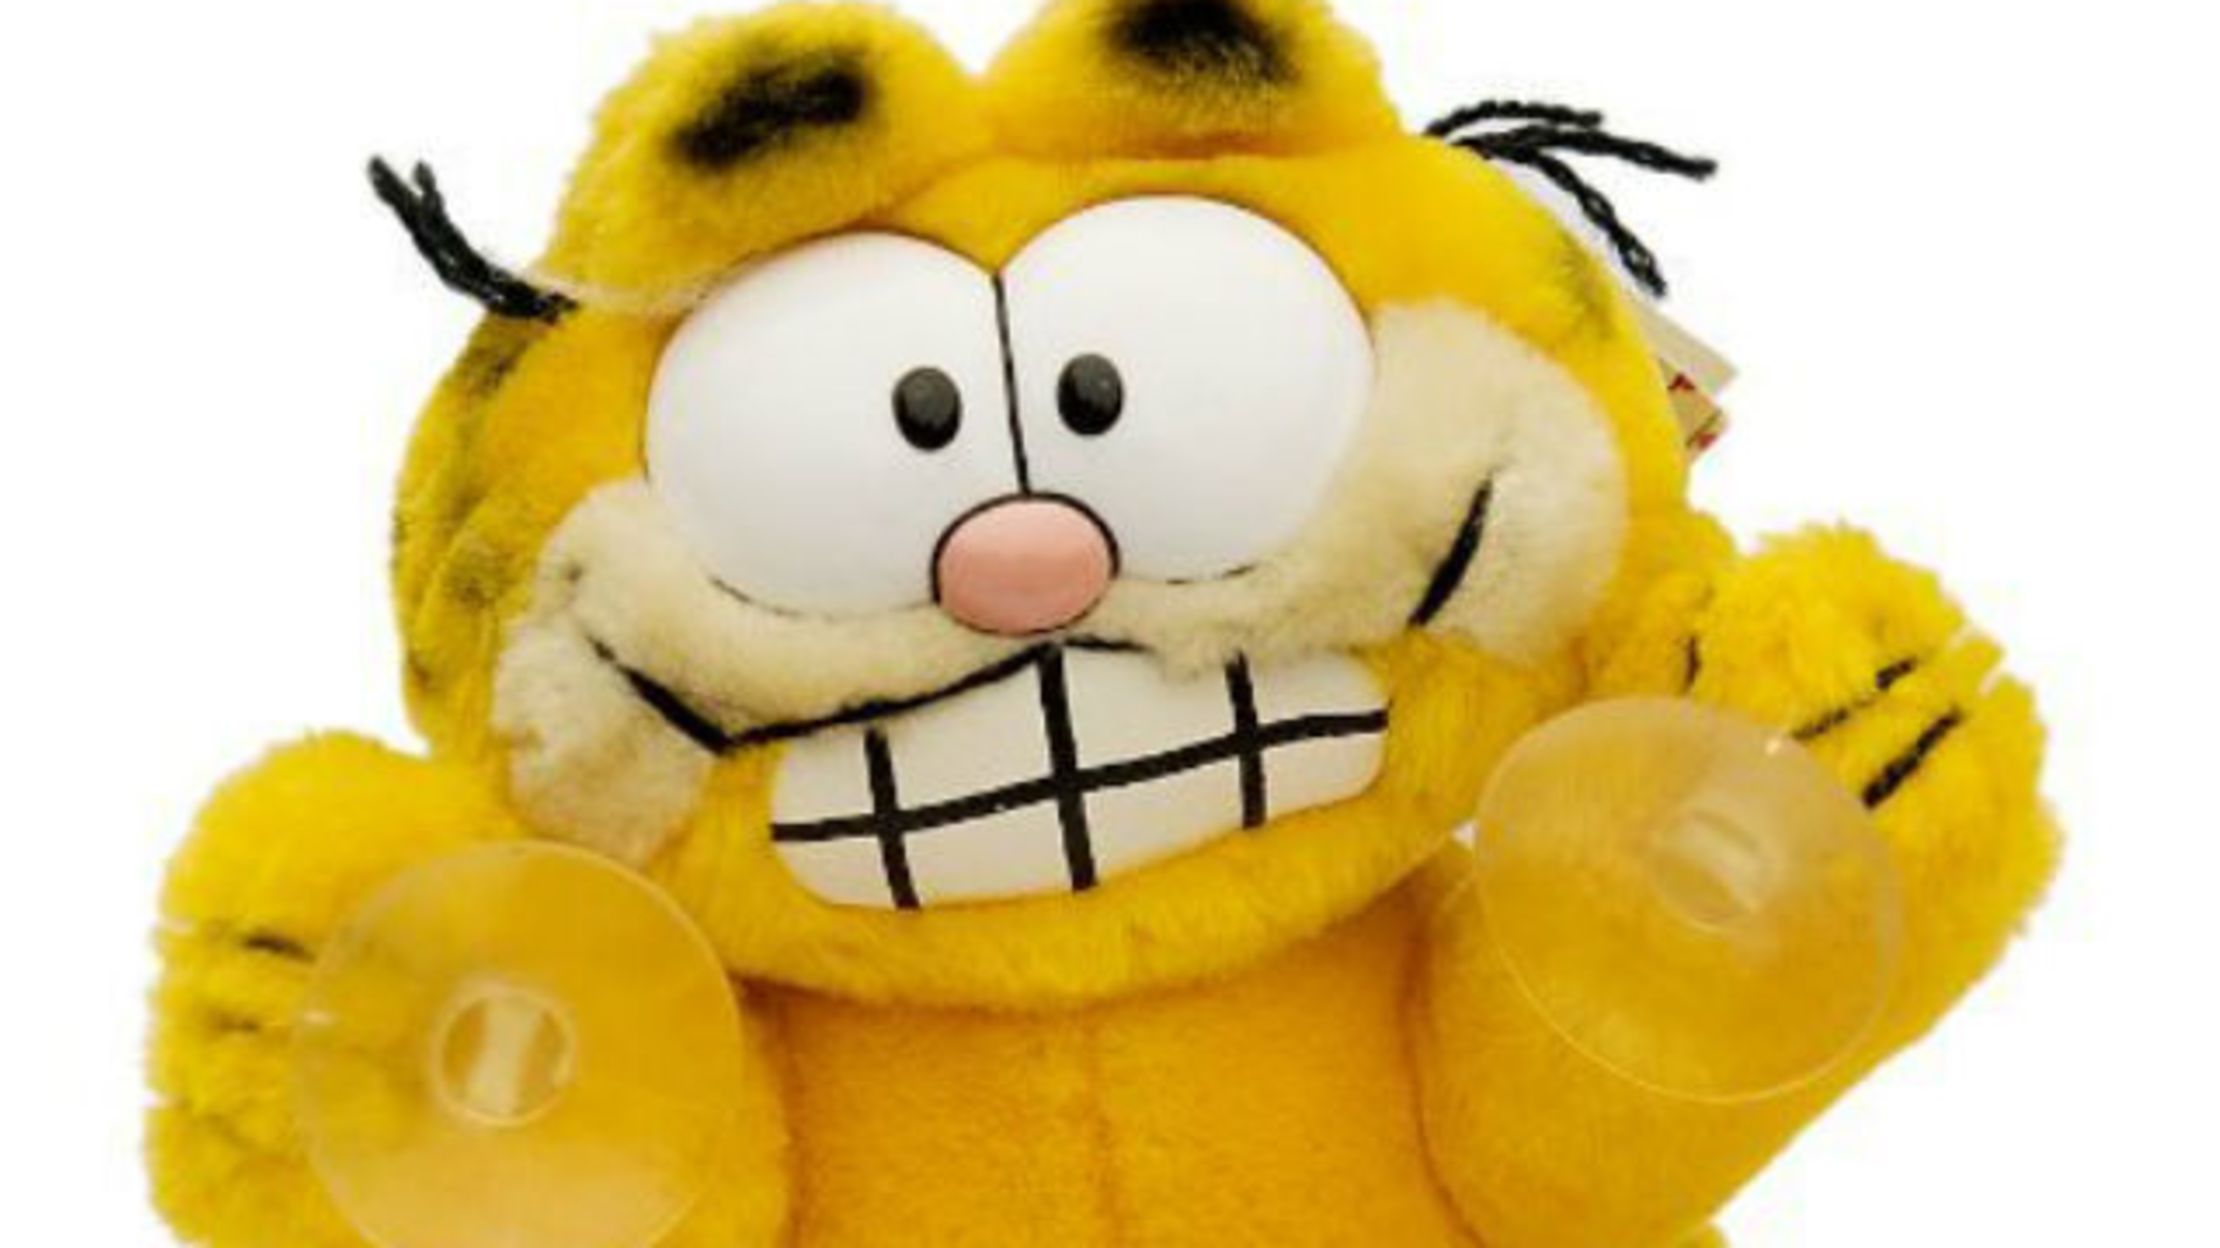 garfield plush with suction cups